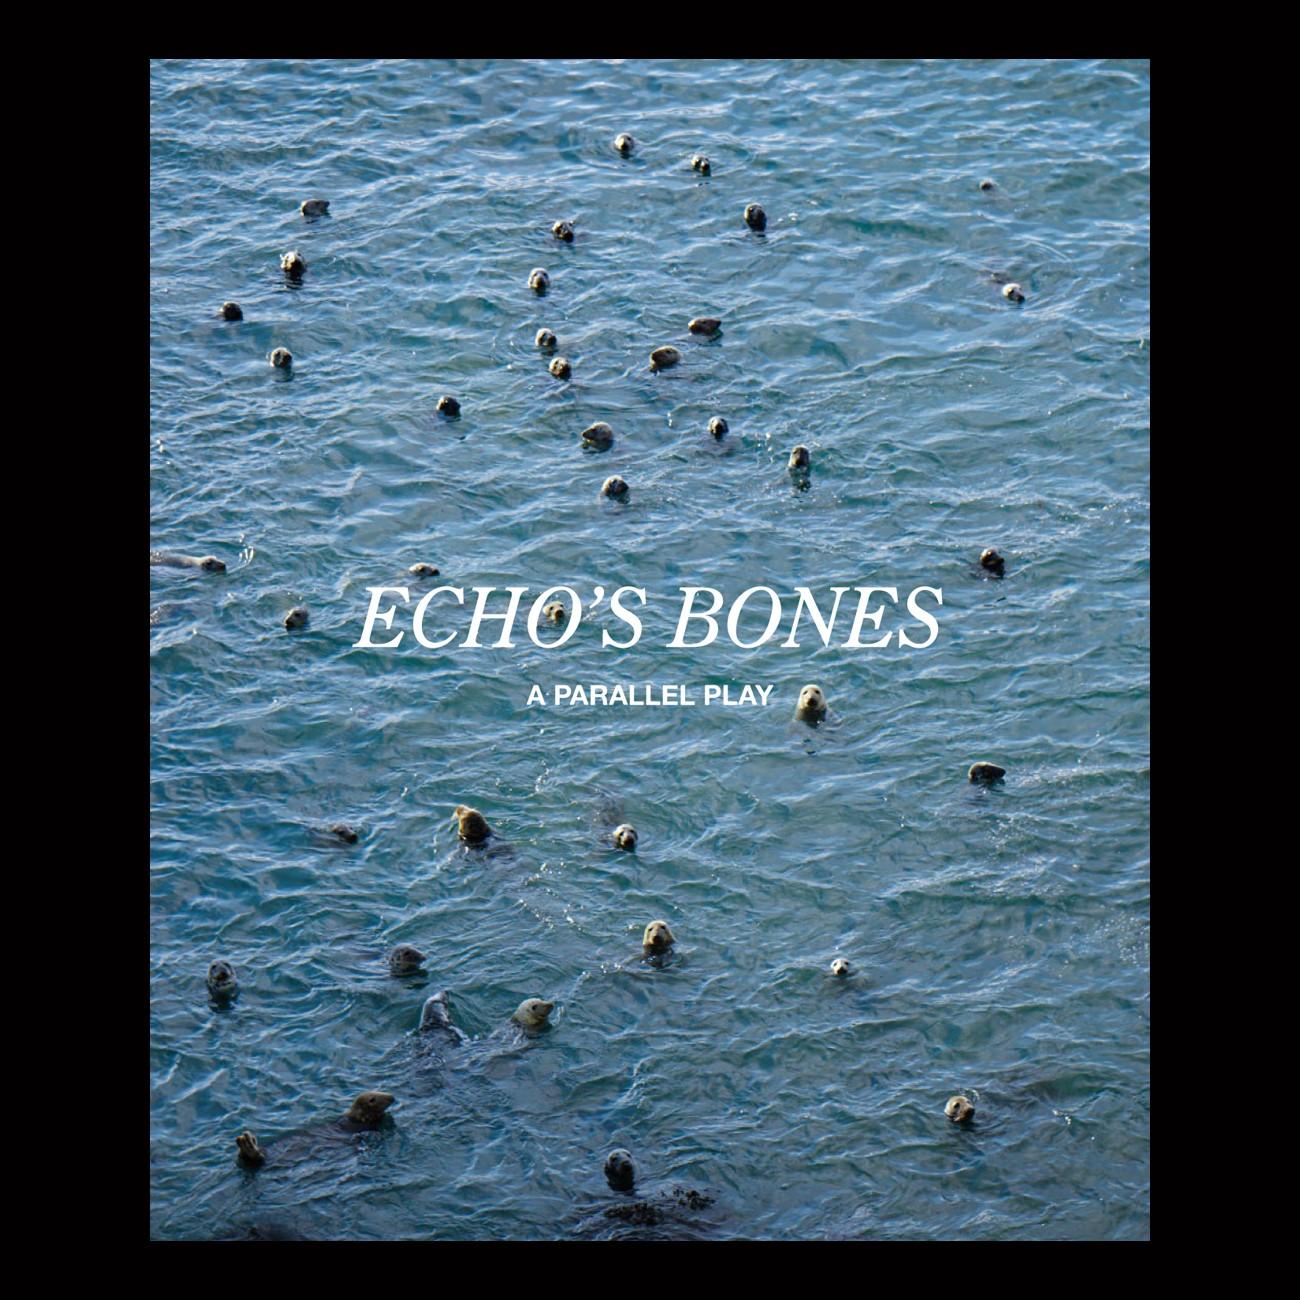 A new book is being launched that celebrates the culmination of the Echo’s Bones project